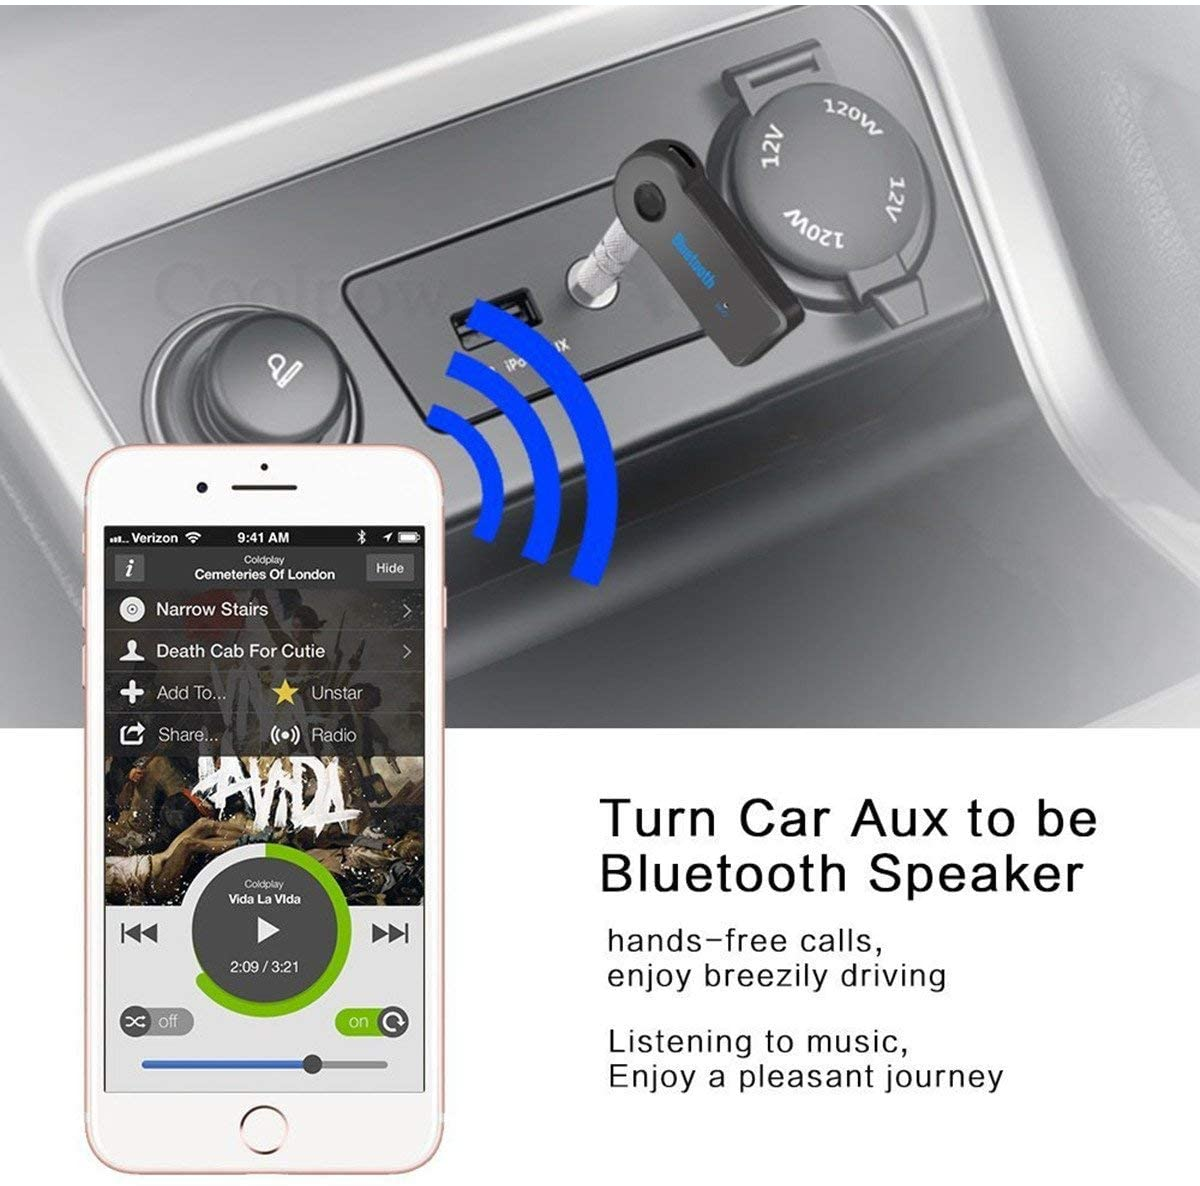 Mini Bluetooth Receiver For Samsung Galaxy Tab A 10.1 (2019) , Wireless To 3.5mm Jack Hands-Free Car Kit 3.5mm Audio Jack w/ LED Button Indicator for Audio Stereo System Headphone Speaker - image 2 of 3